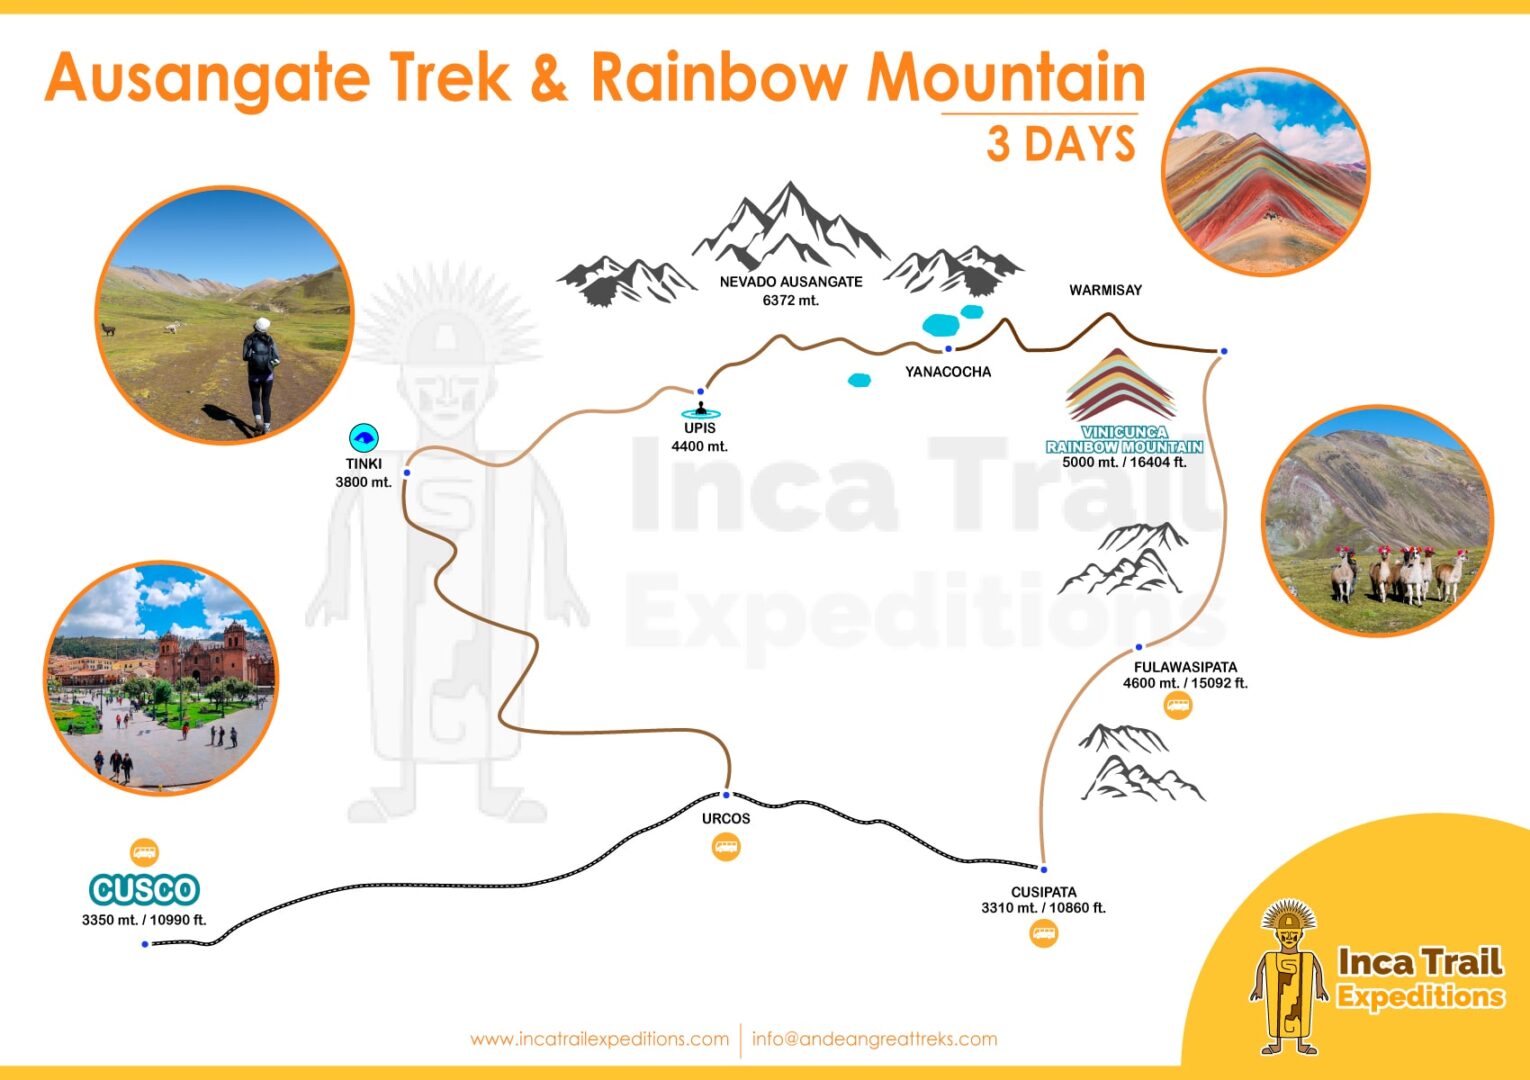 AUSANGATE-TREK-RAINBOW-MOUNTAIN-3-DAYS-BY-INCA-TRAIL-EXPEDITIONS